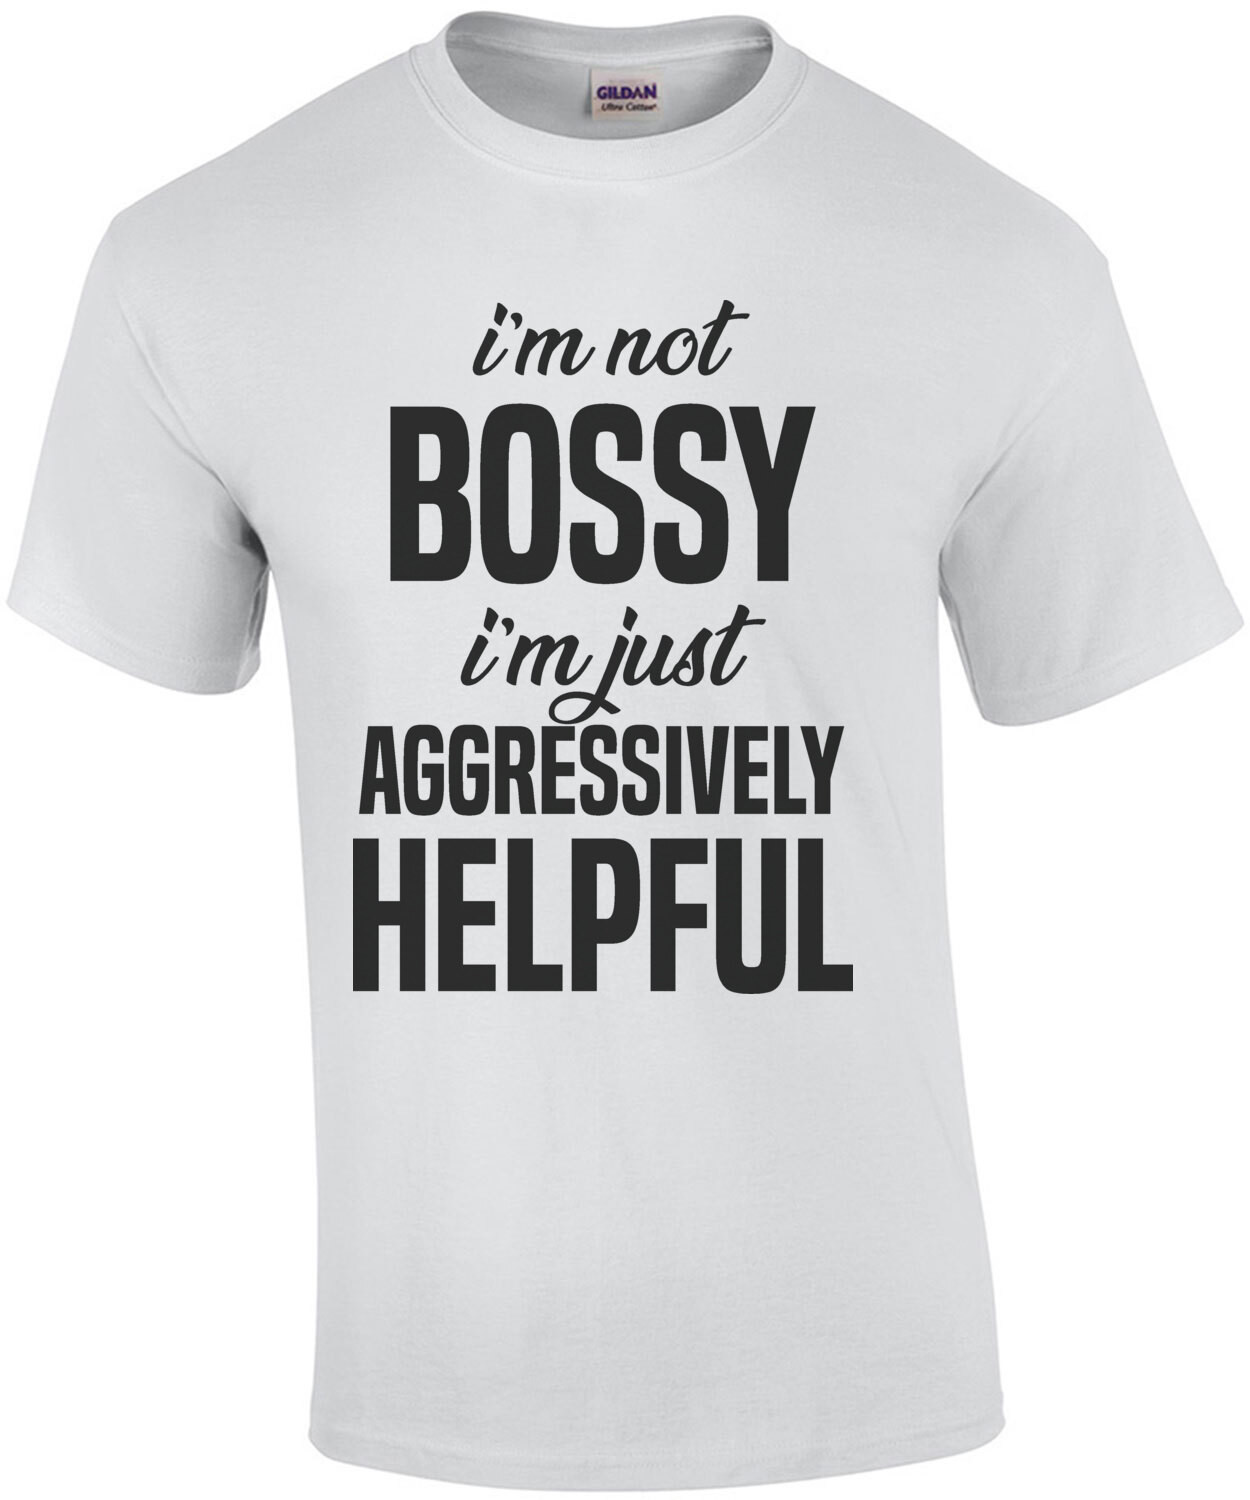 I'm not bossy - I'm just aggressively helpful - sarcastic t-shirt